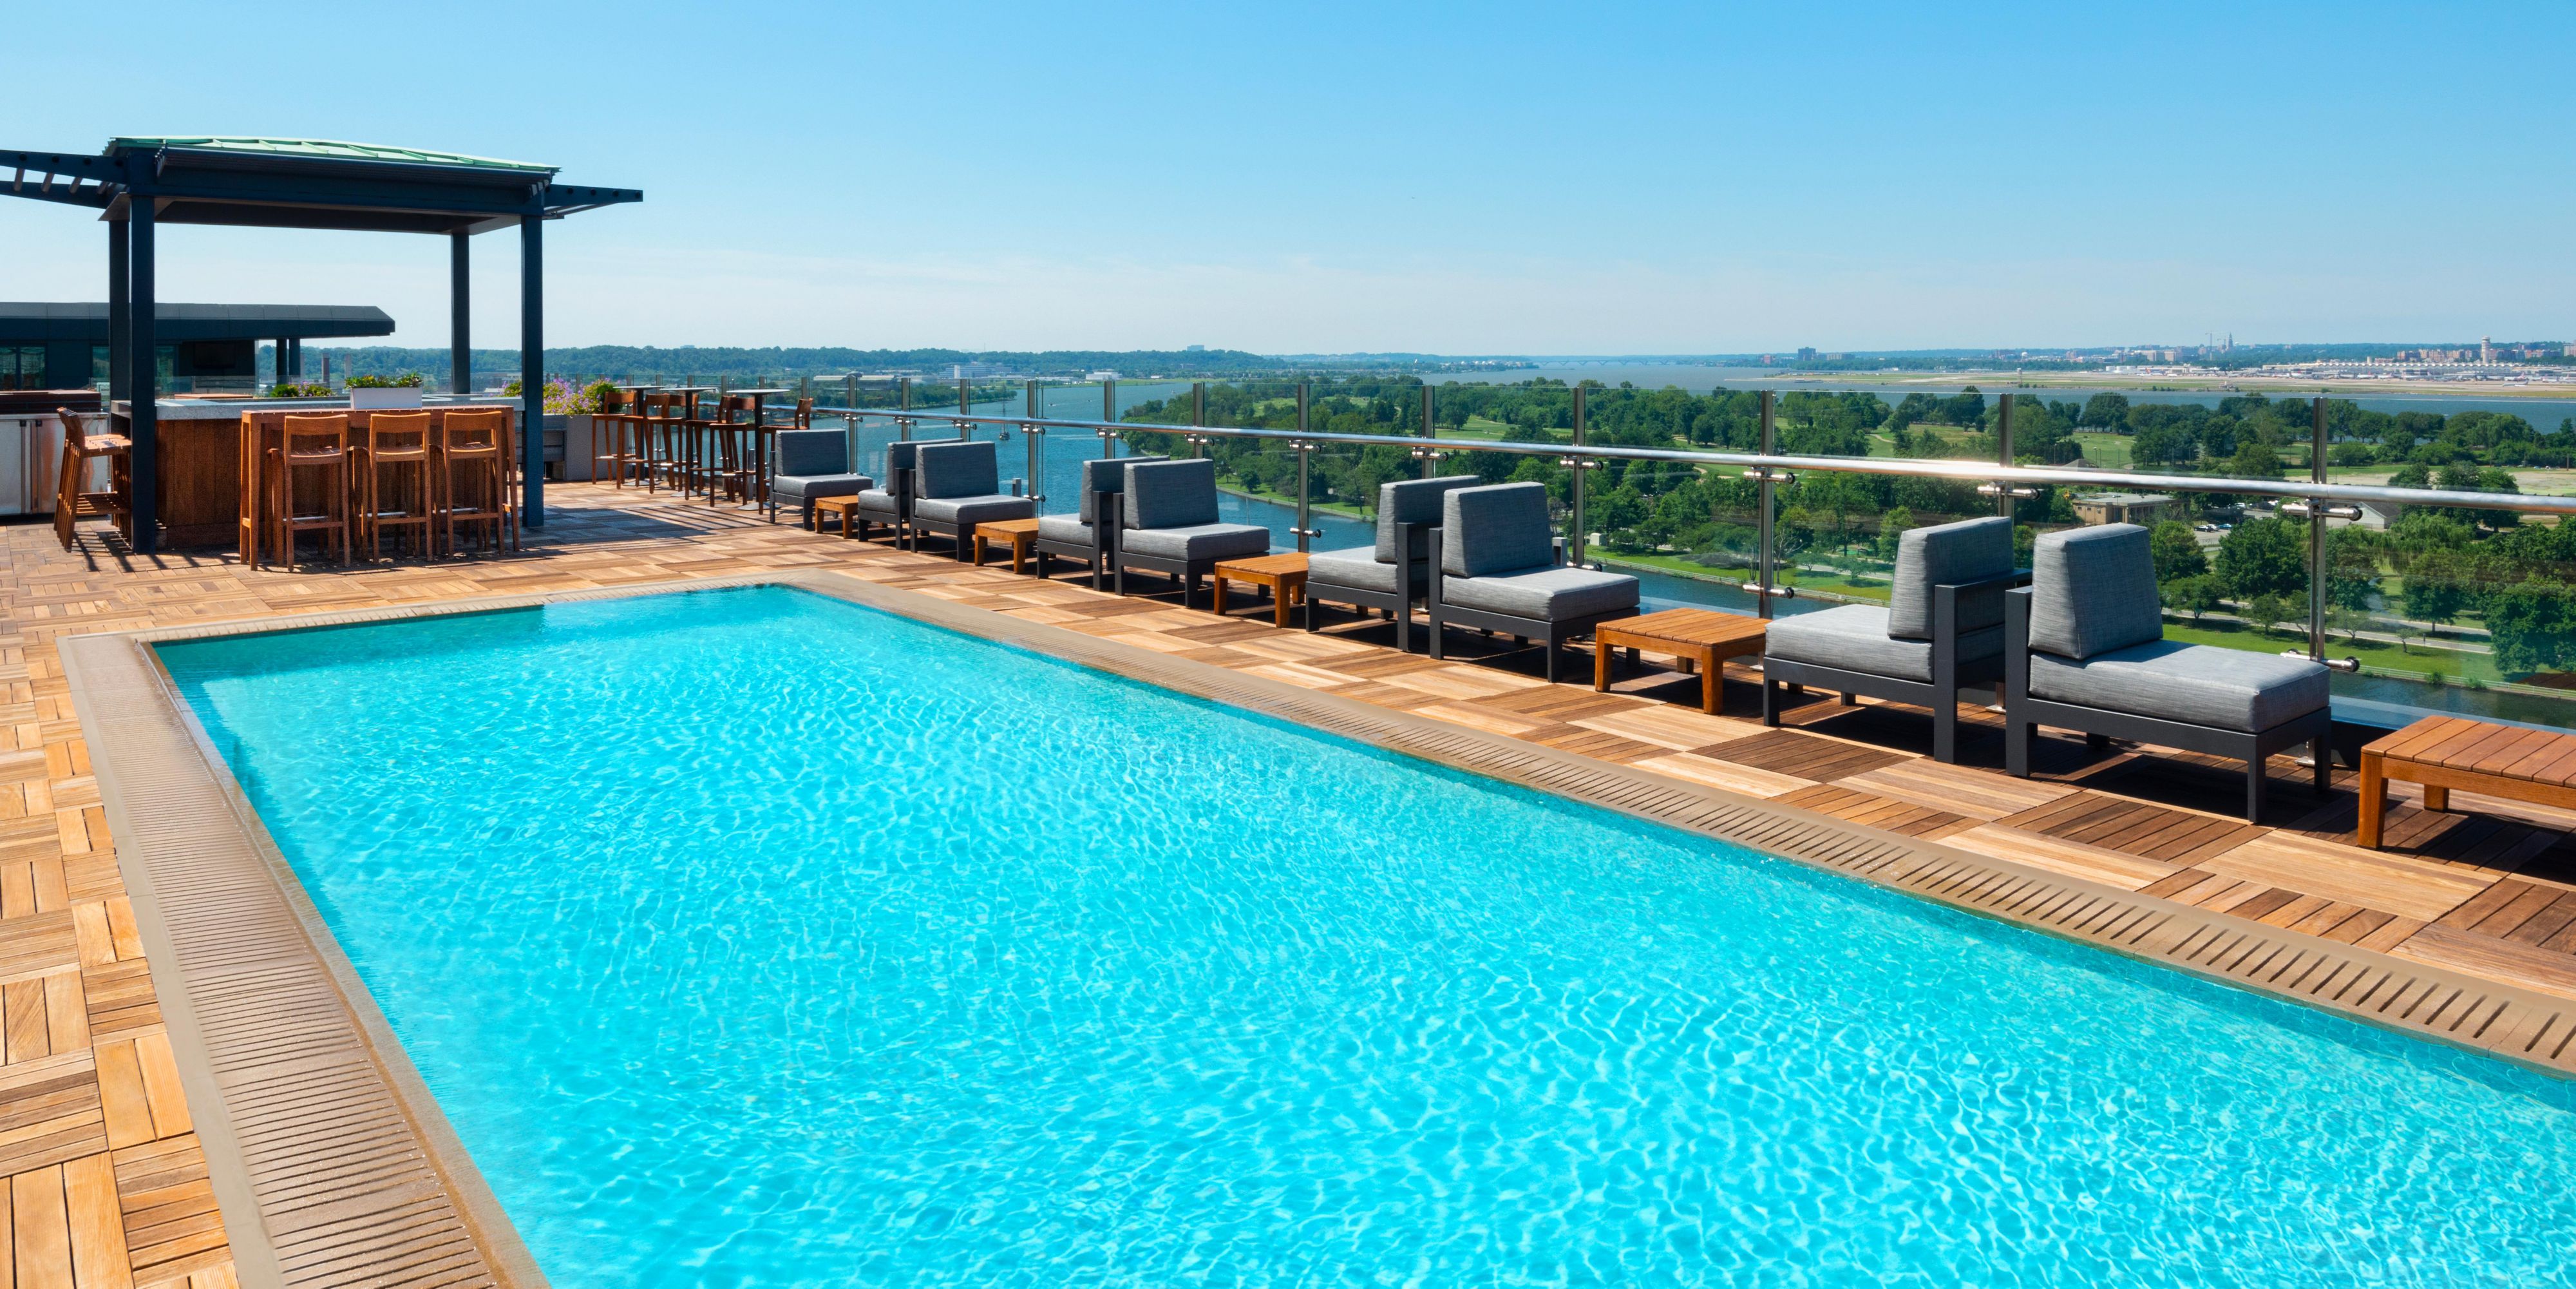 Whether you want to swim laps first thing in the morning or enjoy the D.C. sunset with a cocktail in hand, our Rooftop is the ideal place to unwind. Our rooftop infinity pool and bar offer unparalleled views and are open exclusively for hotel guests. Take in the stunning vistas while sampling light appetizers and bespoke cocktails.